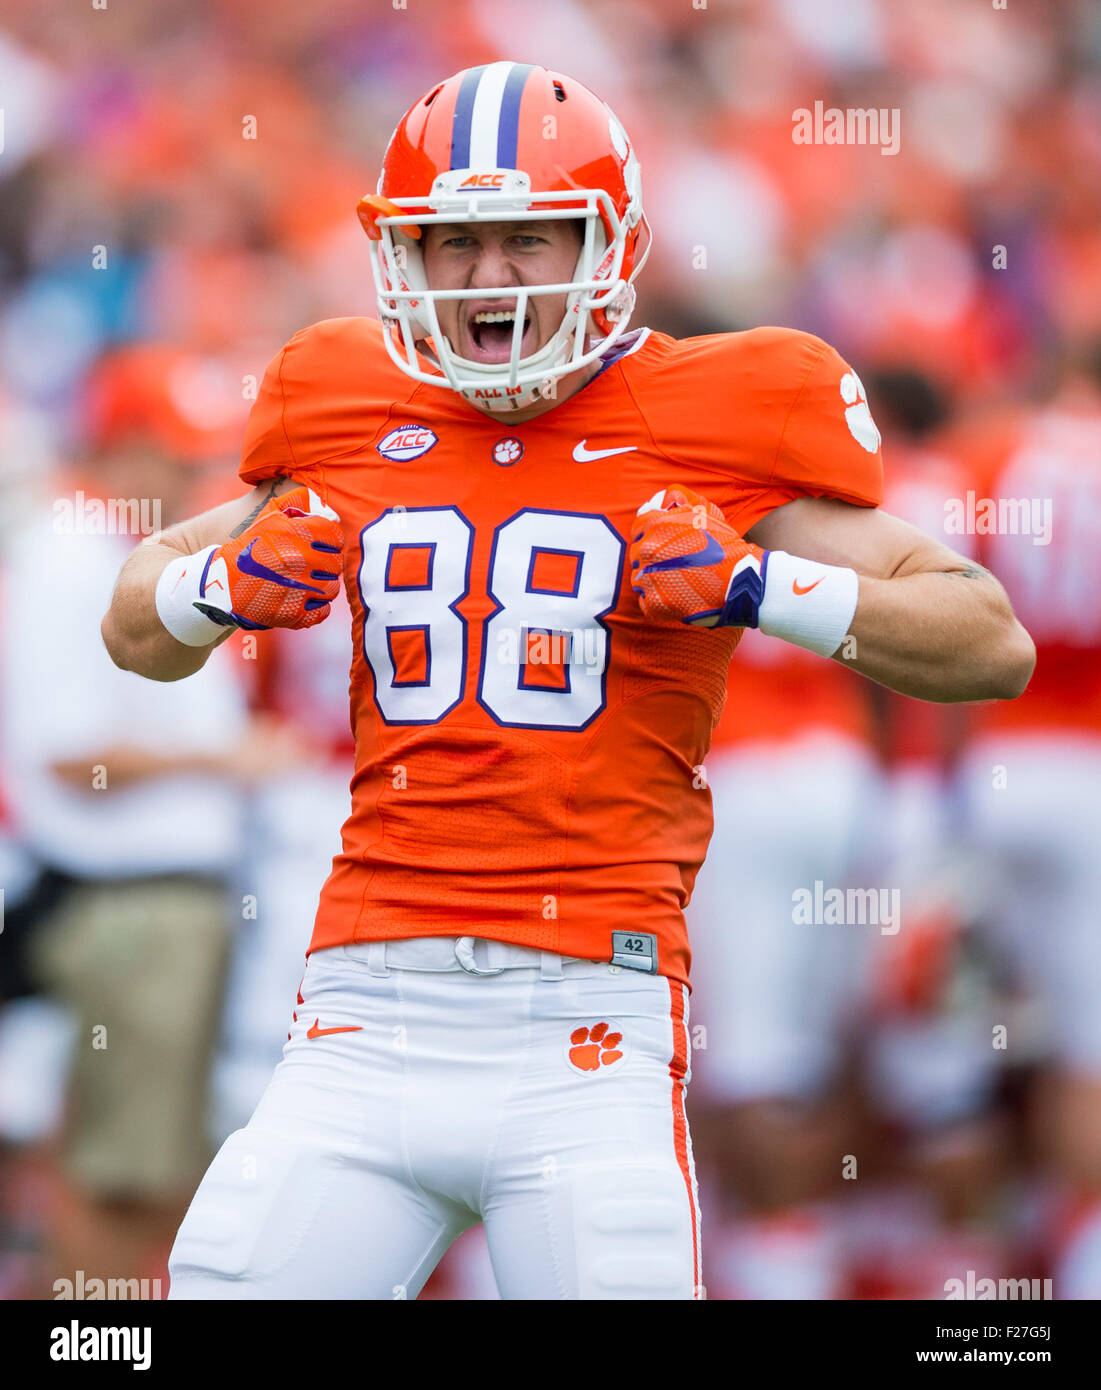 Clemson wide receiver Sean Mac Lain (88) during the NCAA college football game between Clemson and Appalachian State on Saturday Sep. 12, 2015 at Memorial Stadium, in Clemson, S.C. Jacob Kupferman/CSM Stock Photo